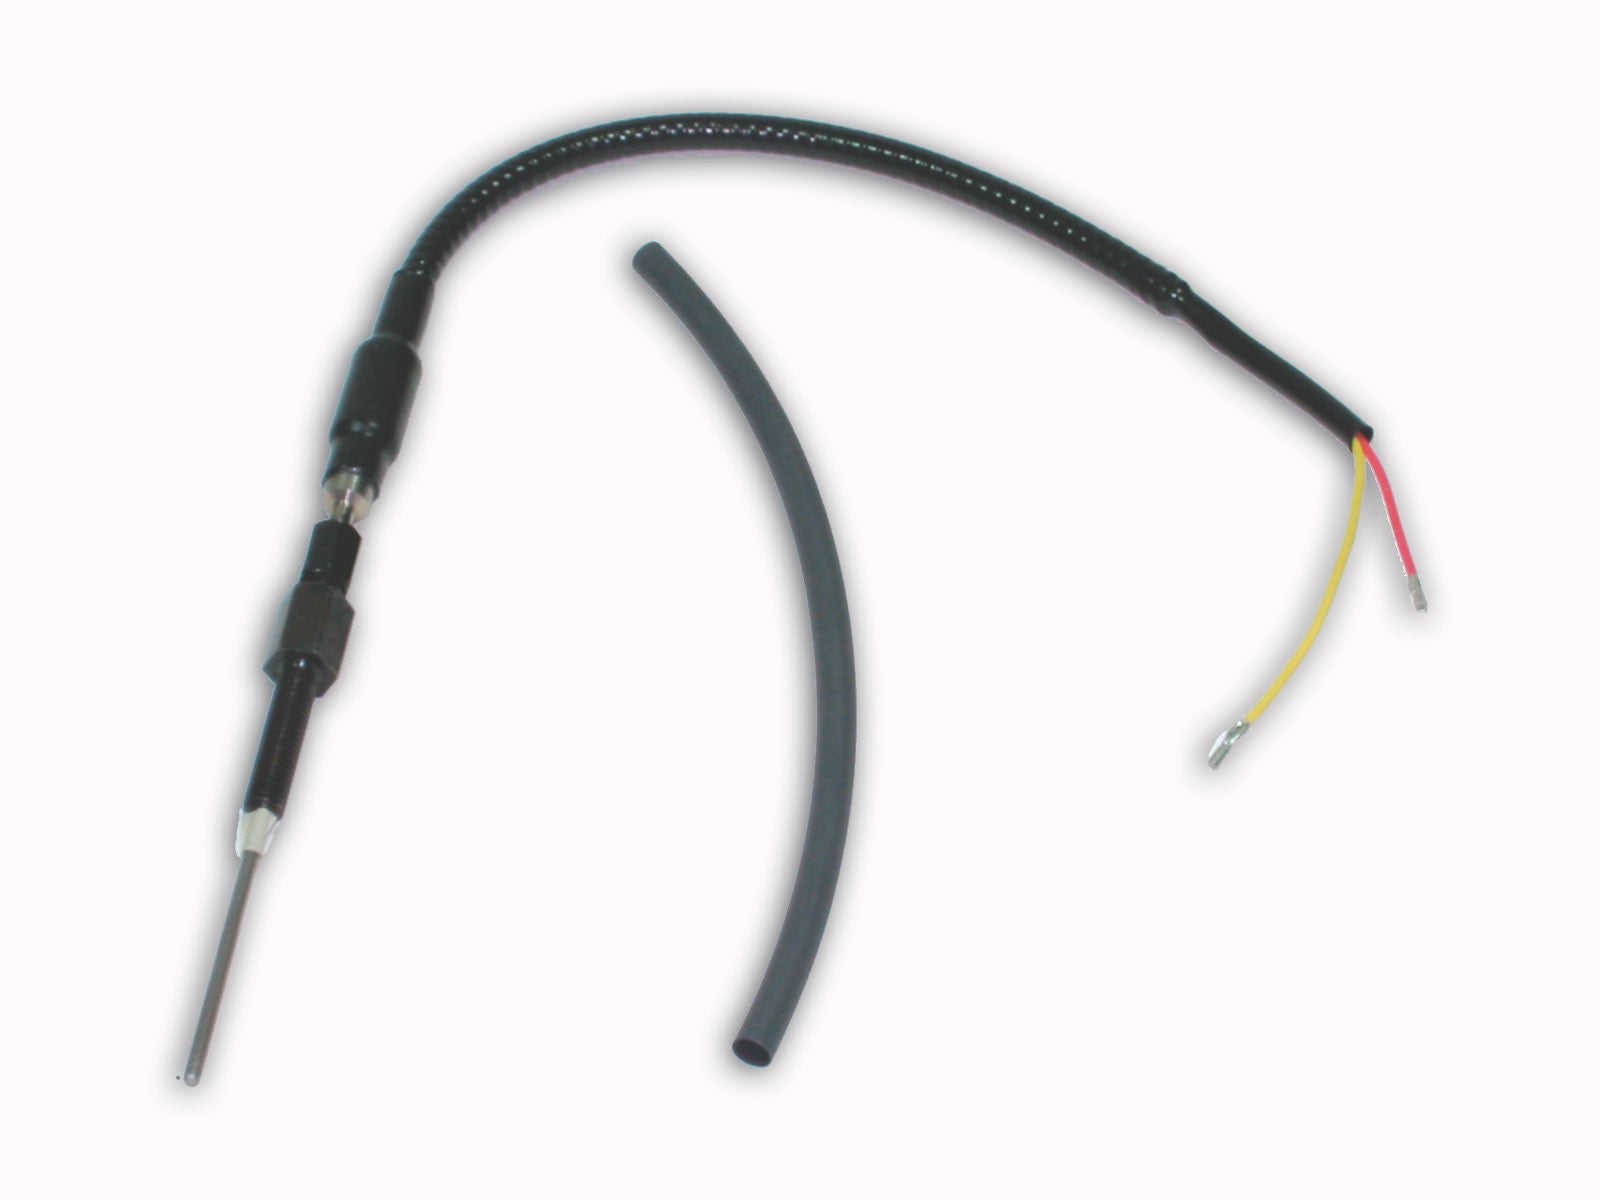 GAFFRIG PART #9270 THIN PYROMETER PROBE UNGROUNDED WITH 9269 FOR MODELS 5024, 5524, 5824, 4400, 4900